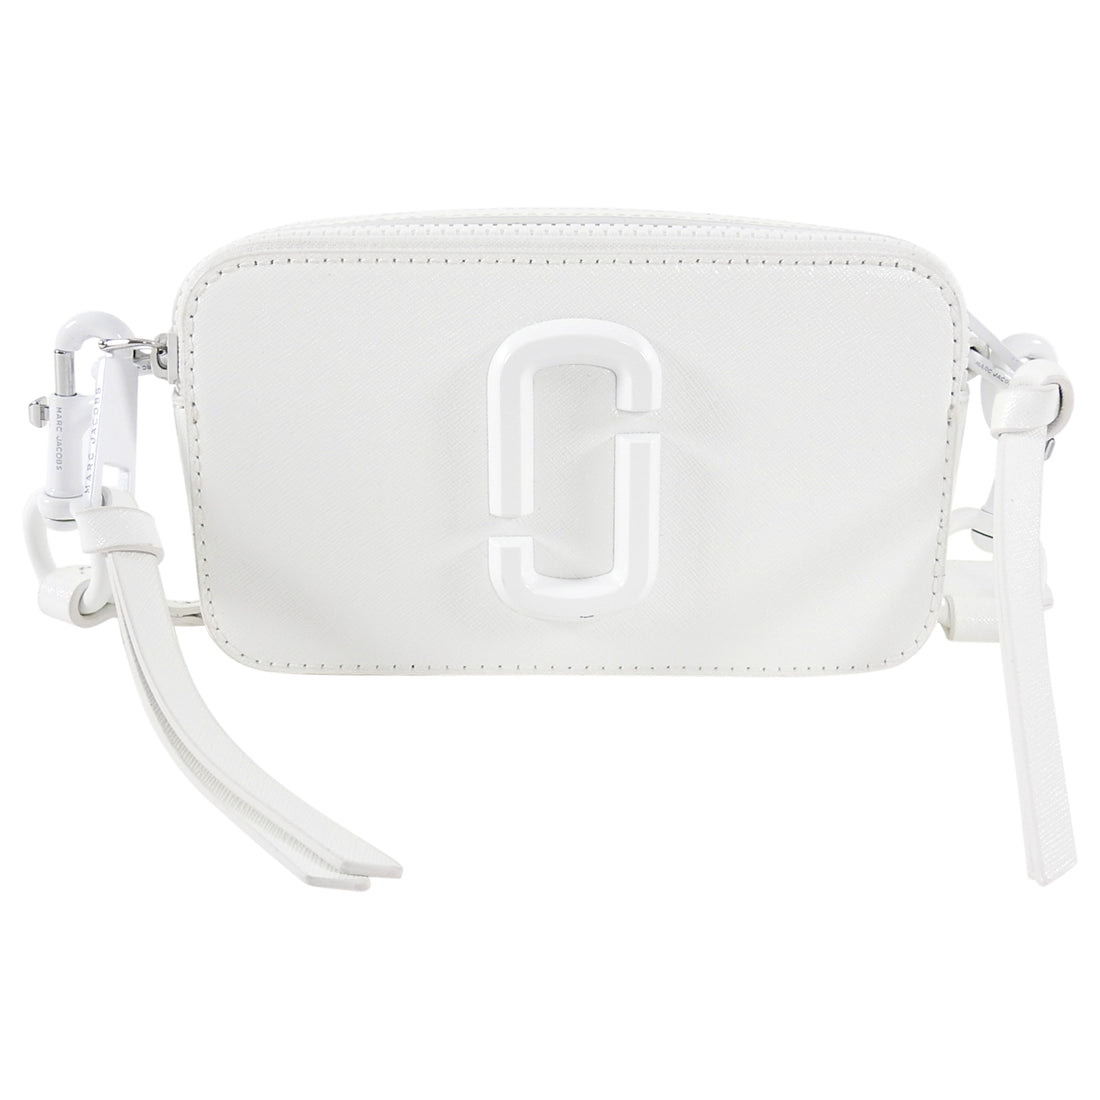 The Marc Jacobs White Small Snapshot Crossbody Bag